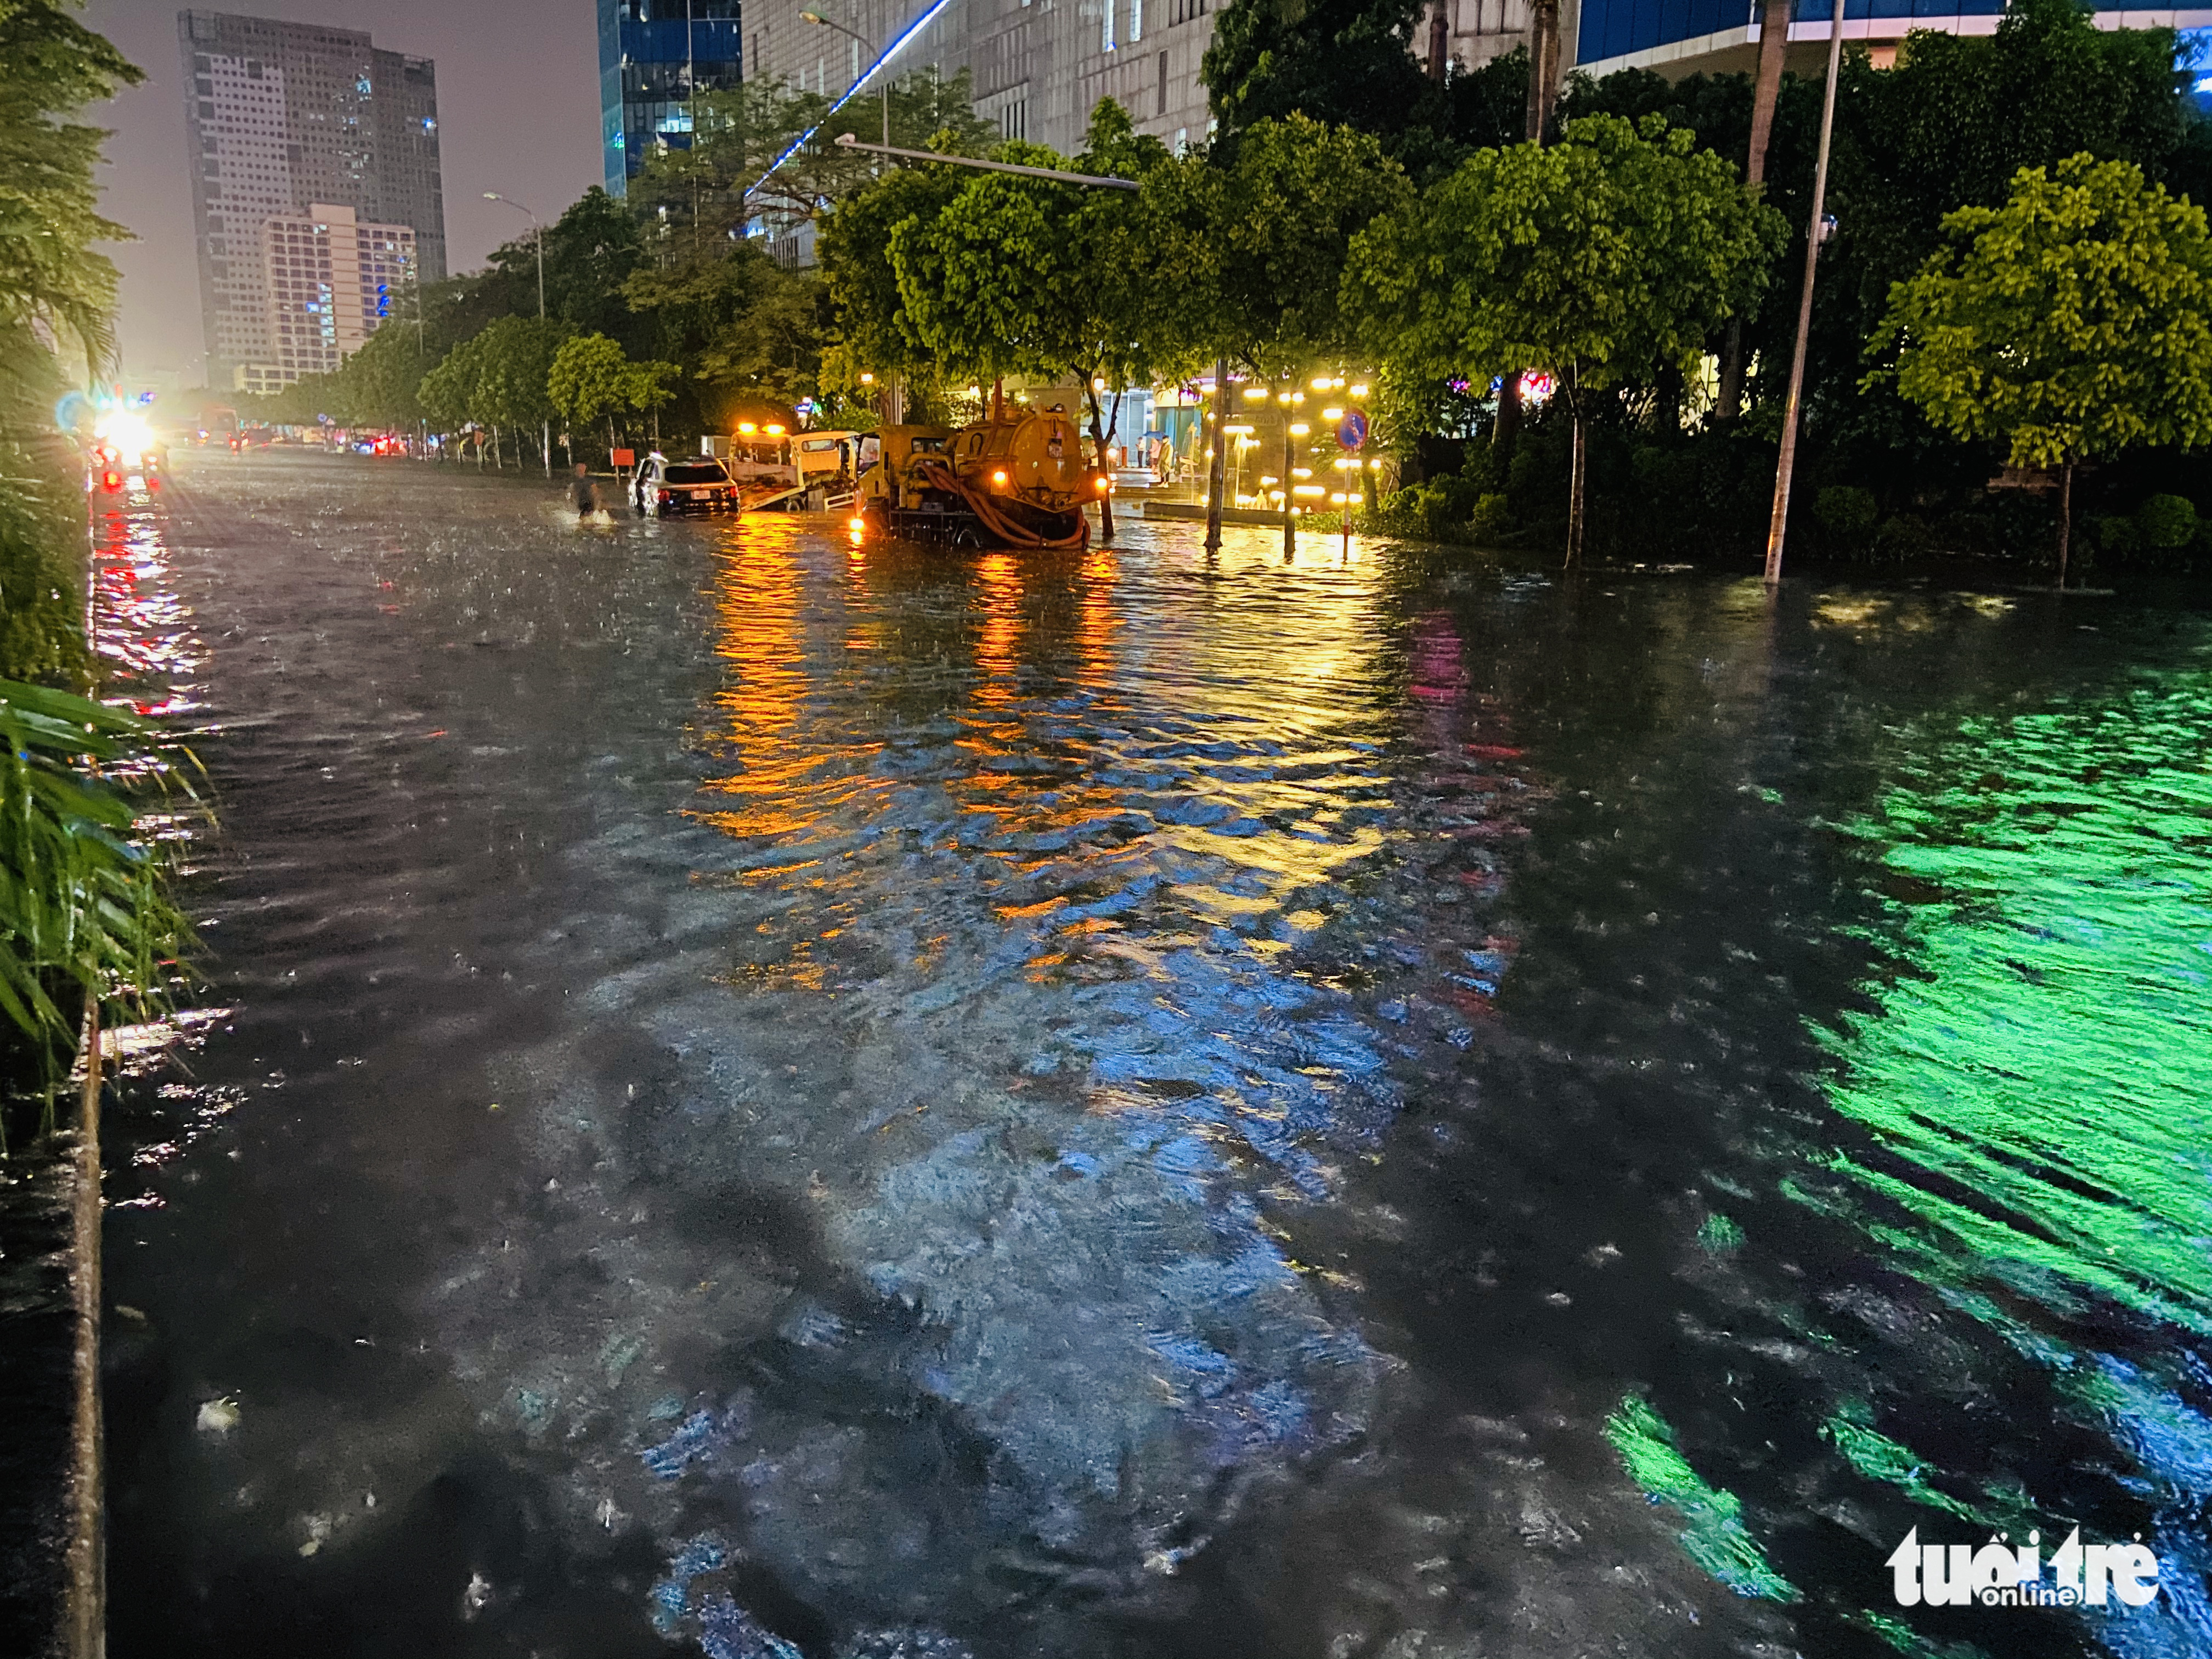 Duong Dinh Nghe Street in Hanoi is still submerged as of 9:20 pm on July 5, 2022. Photo: Q. The / Tuoi Tre